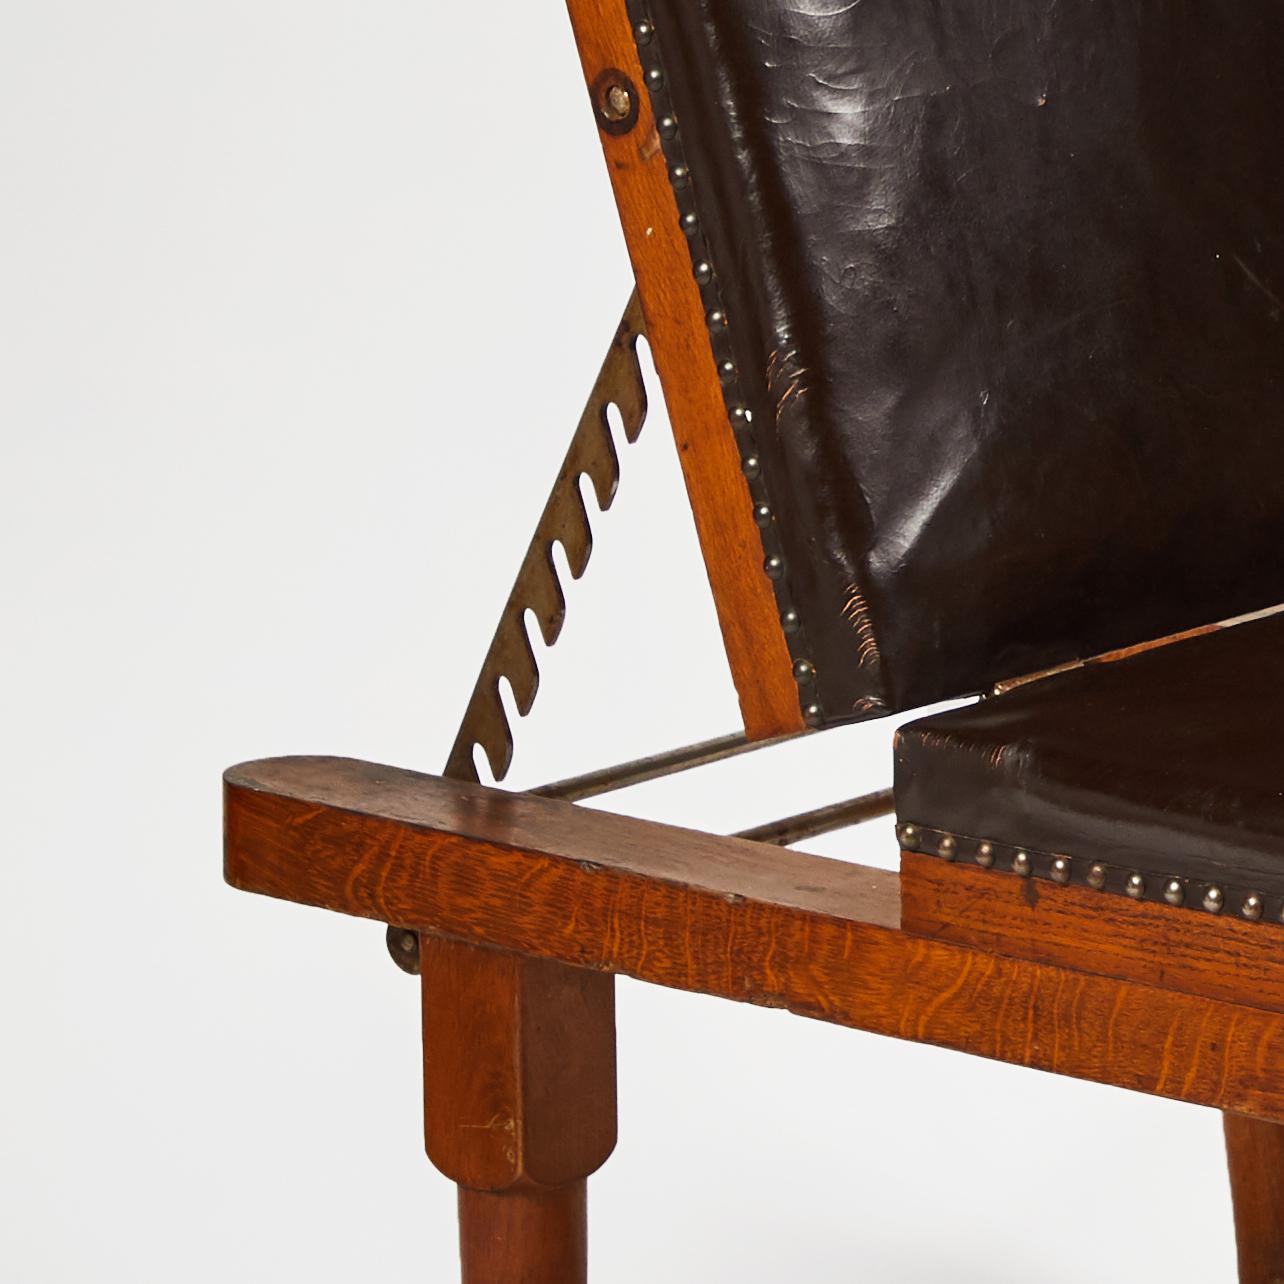 French Reclining Mahogany and Leather Upholstered Chaise from Mid-19th Century France